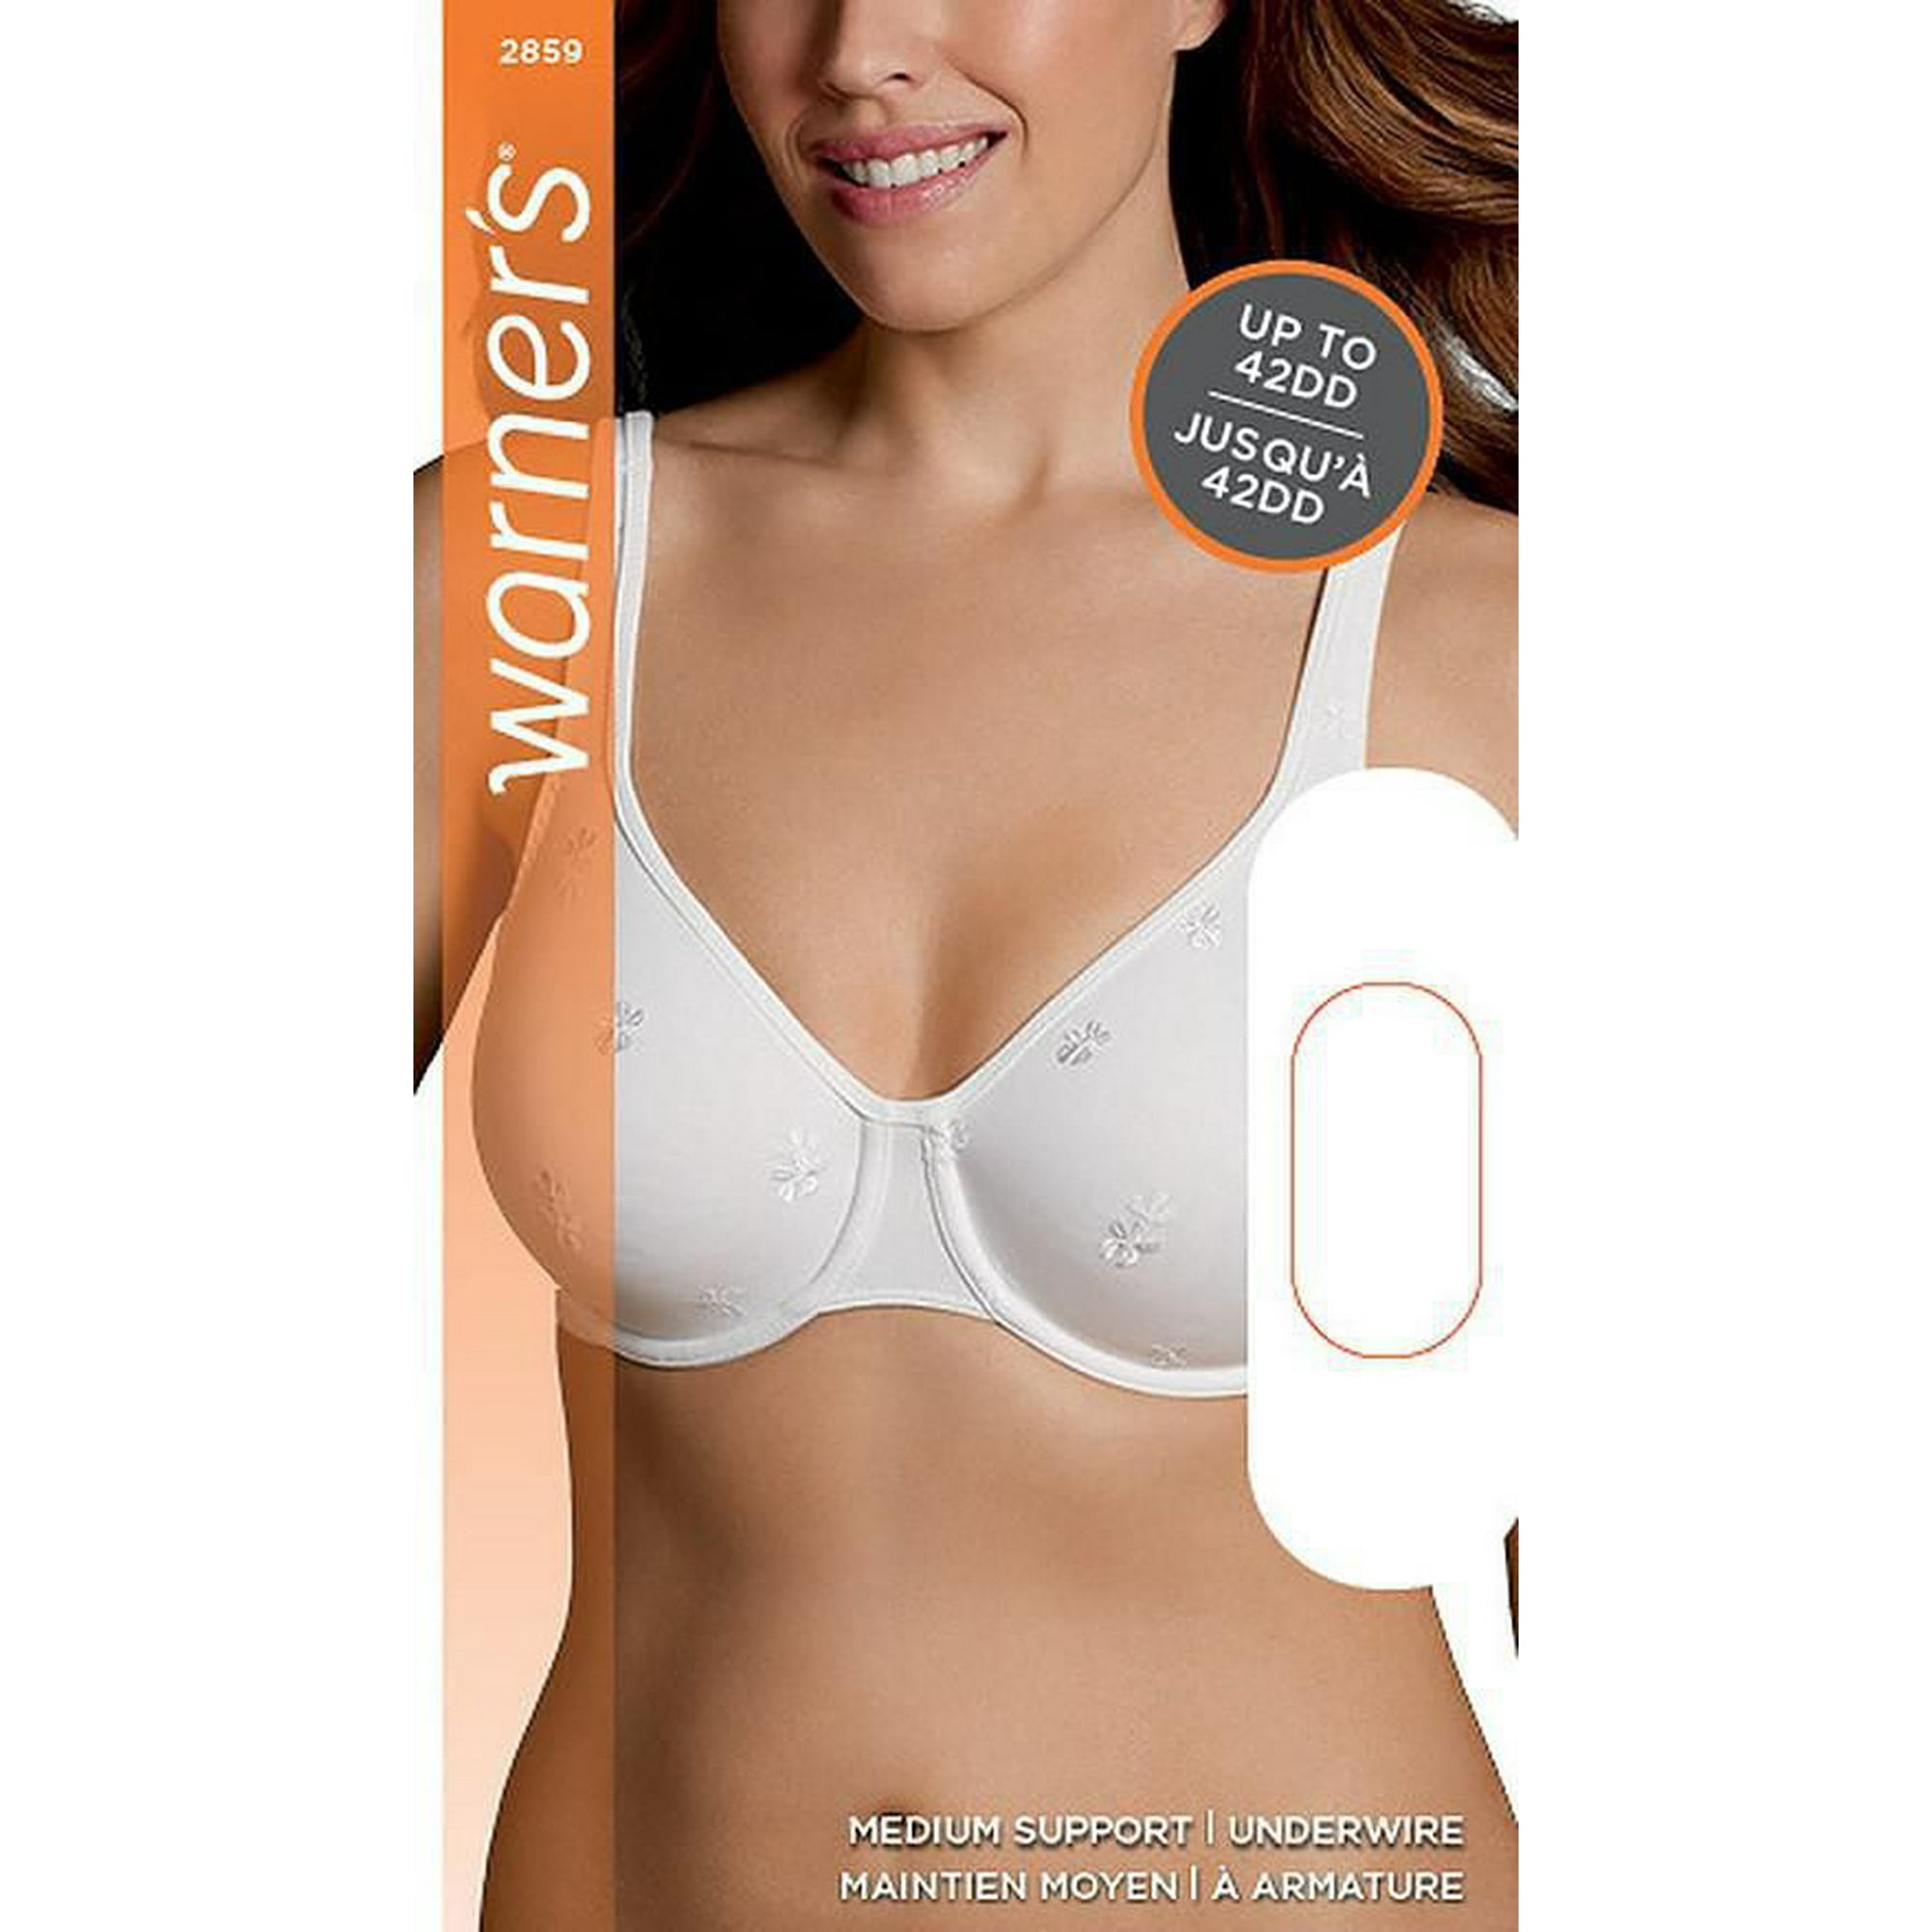 Underwire for Average Size Figure Types in 40DD Bra Size D Cup